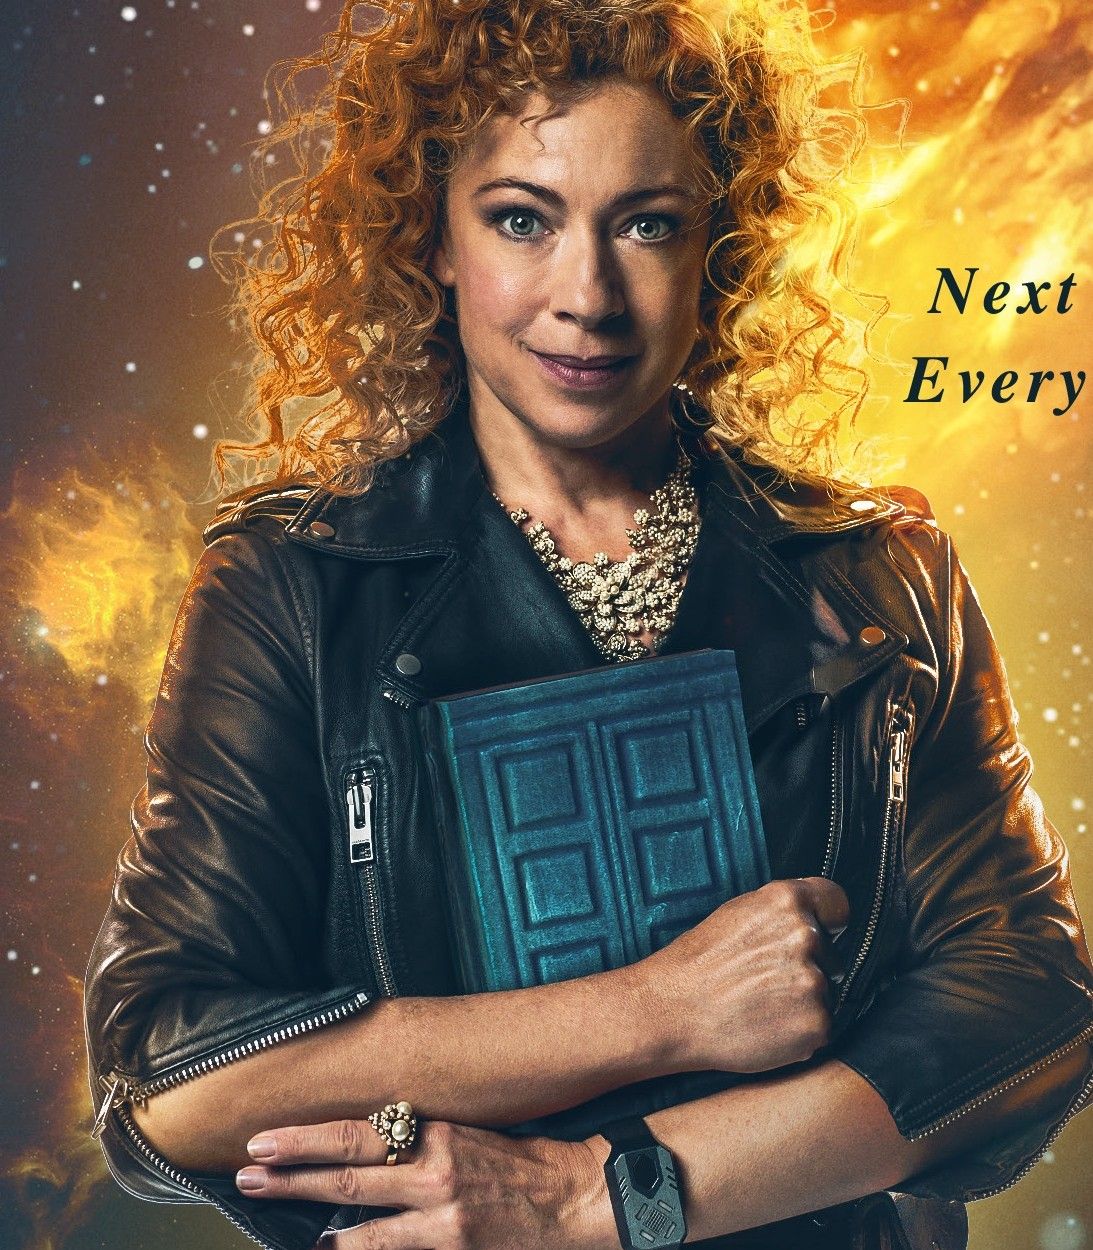 Legend of River Song Doctor Who vertical